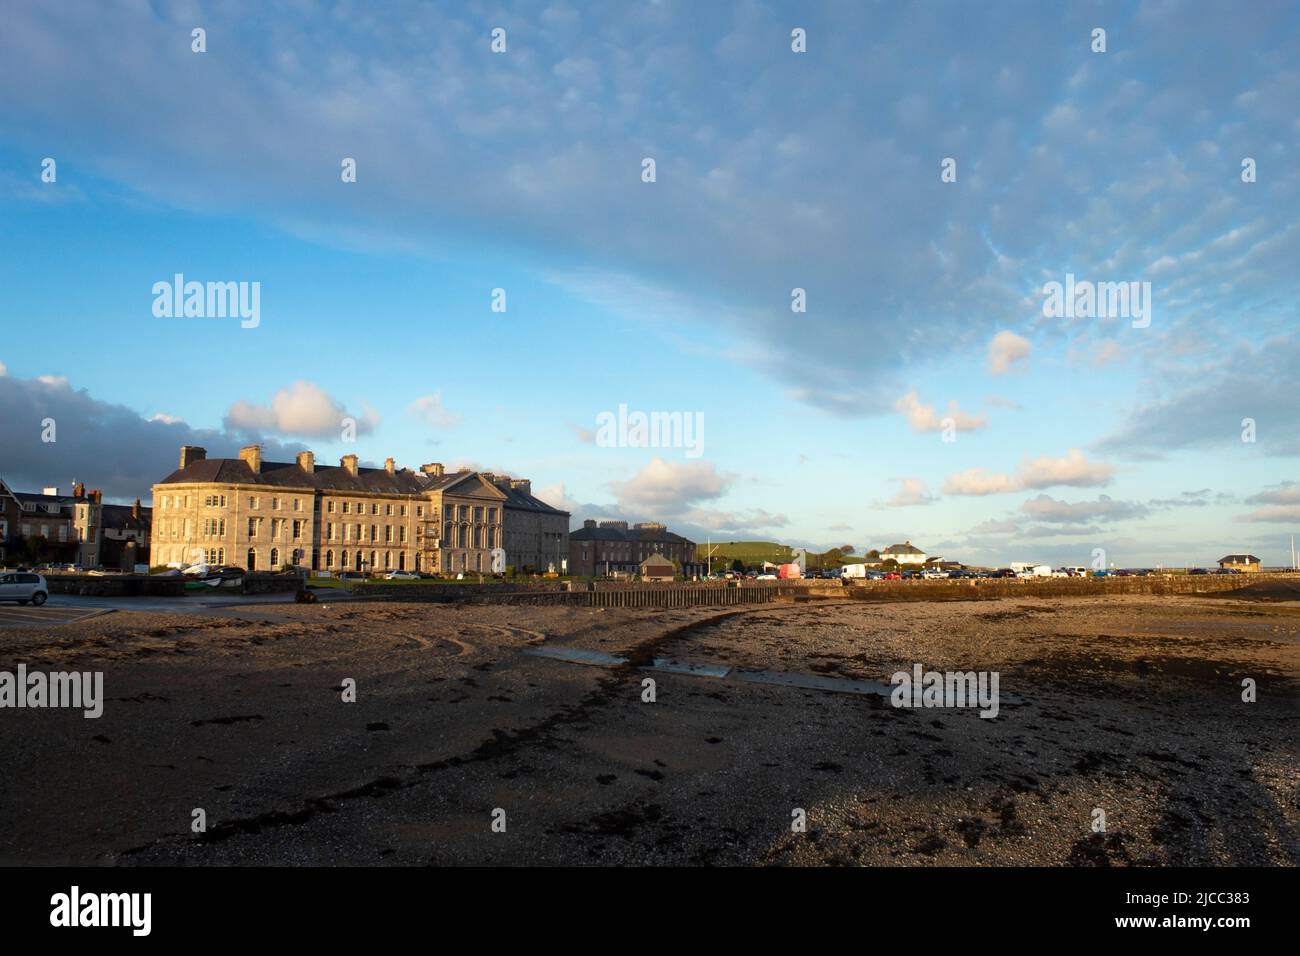 Beaumaris, Anglesey, Wales. Dramatic winter landscape of beach and coast at this charming, historic seaside town.  Blue sky and copy space. Stock Photo